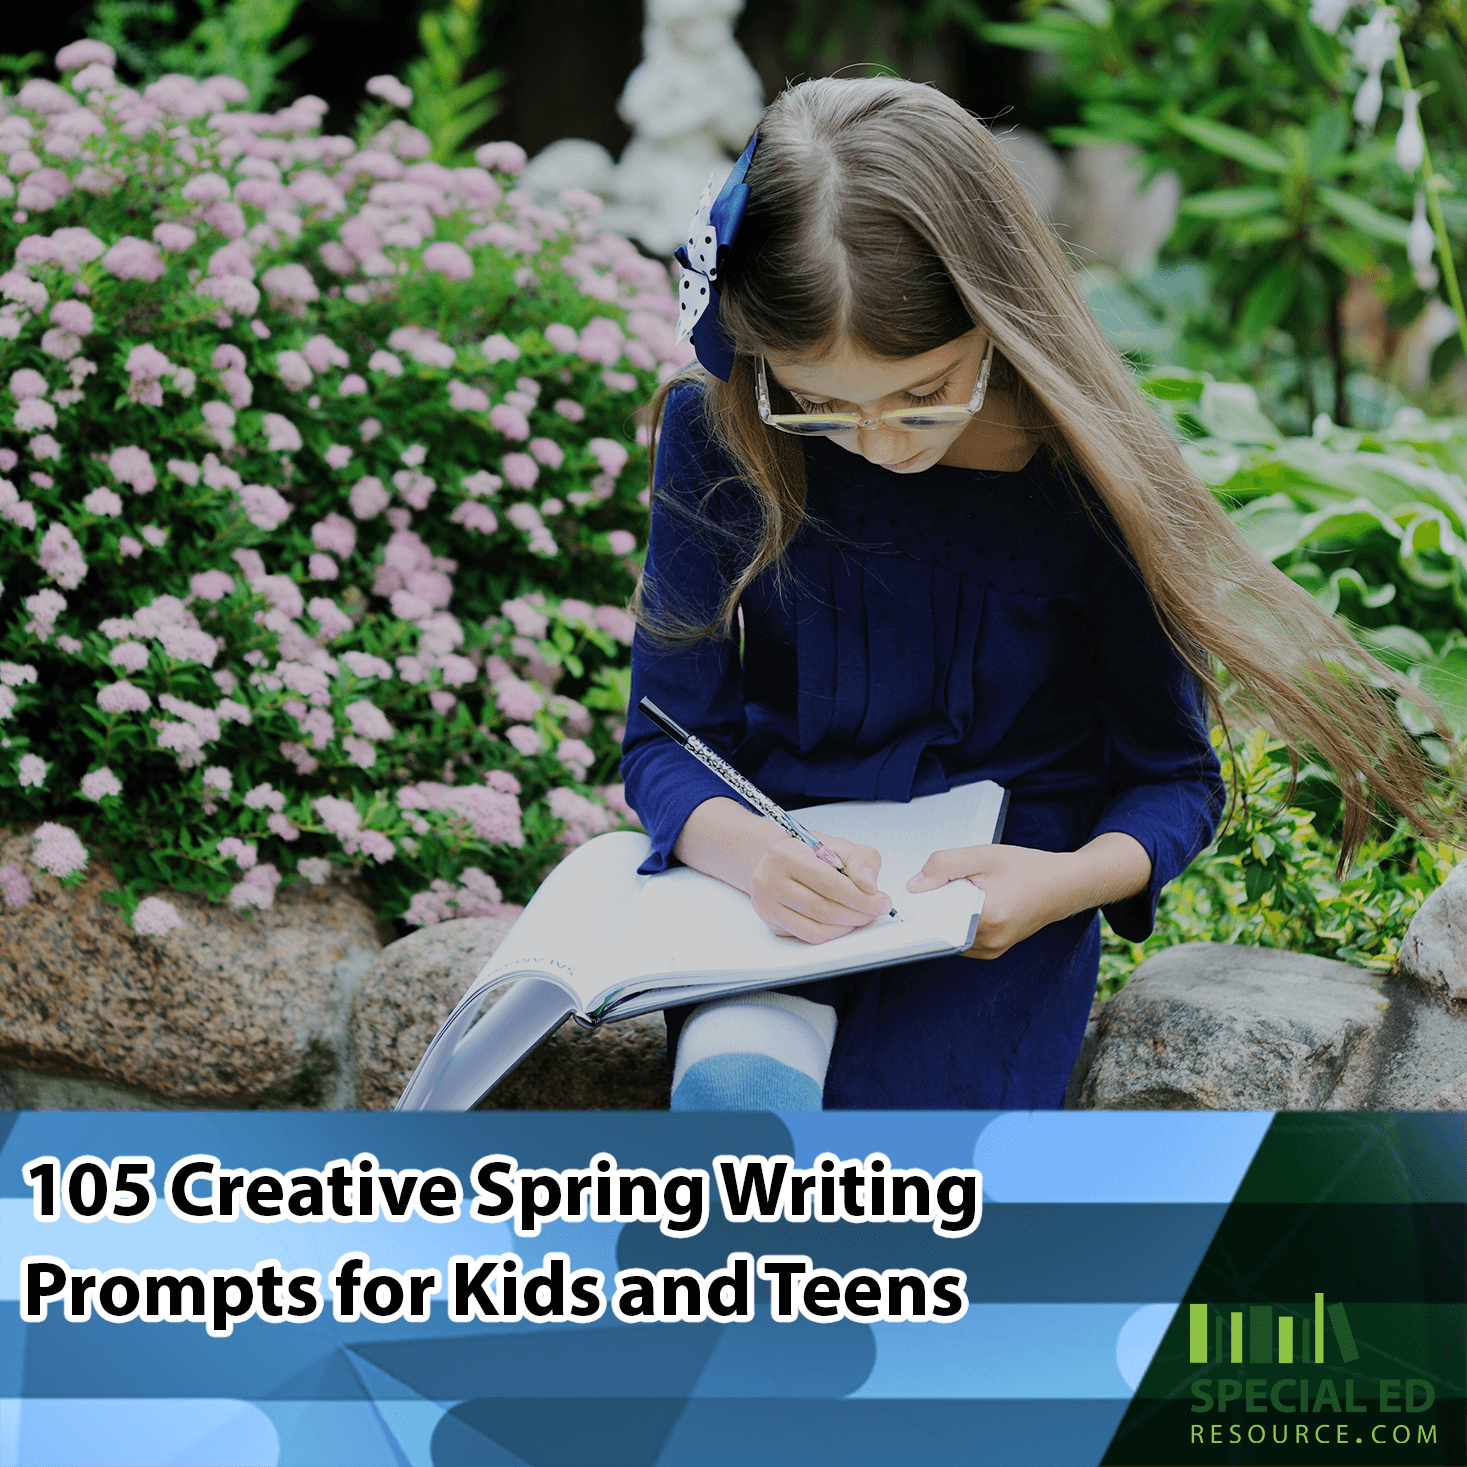 A young girl in a blue dress and glasses, intently writing one of these spring writing prompts for kids in a journal while sitting in a garden blooming with pink flowers.